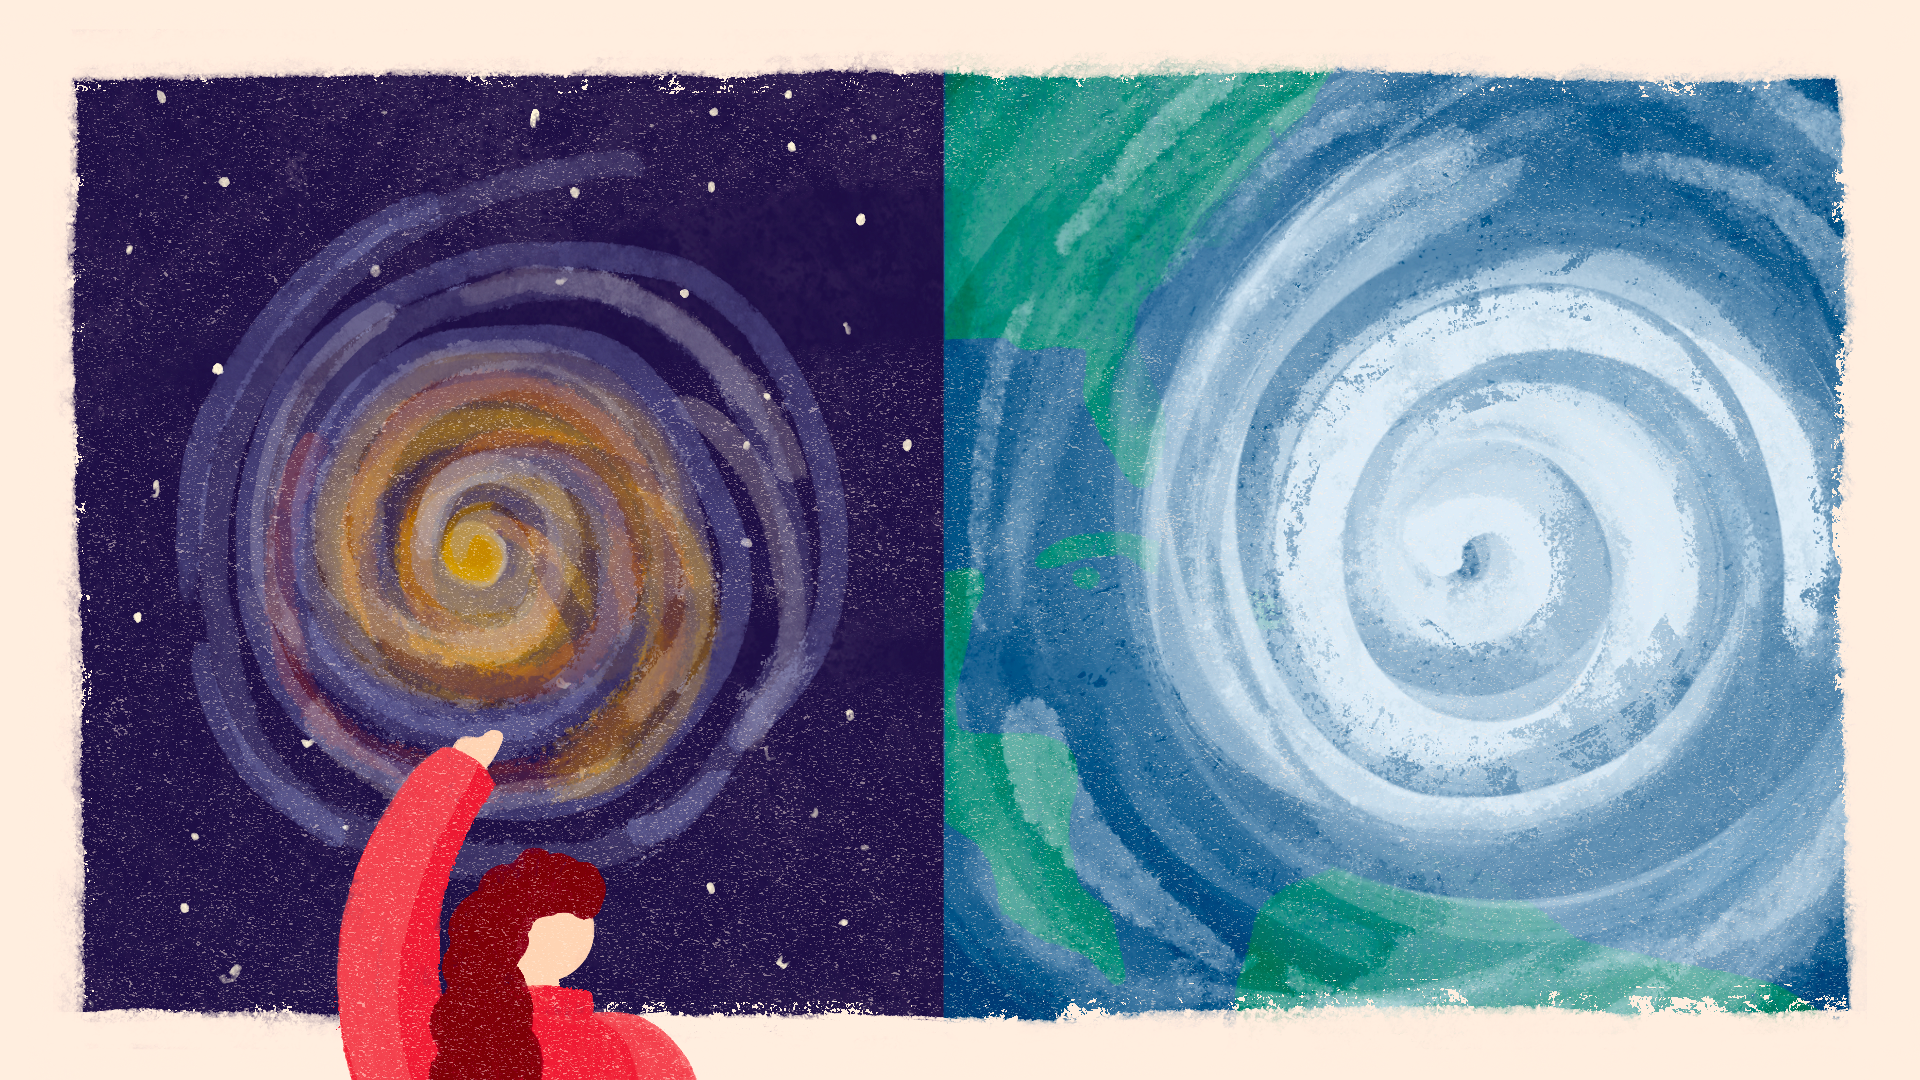 On the left, an illustration of a spiral-formed universe. On the right, an illustration of a hurricane as seen from above it.